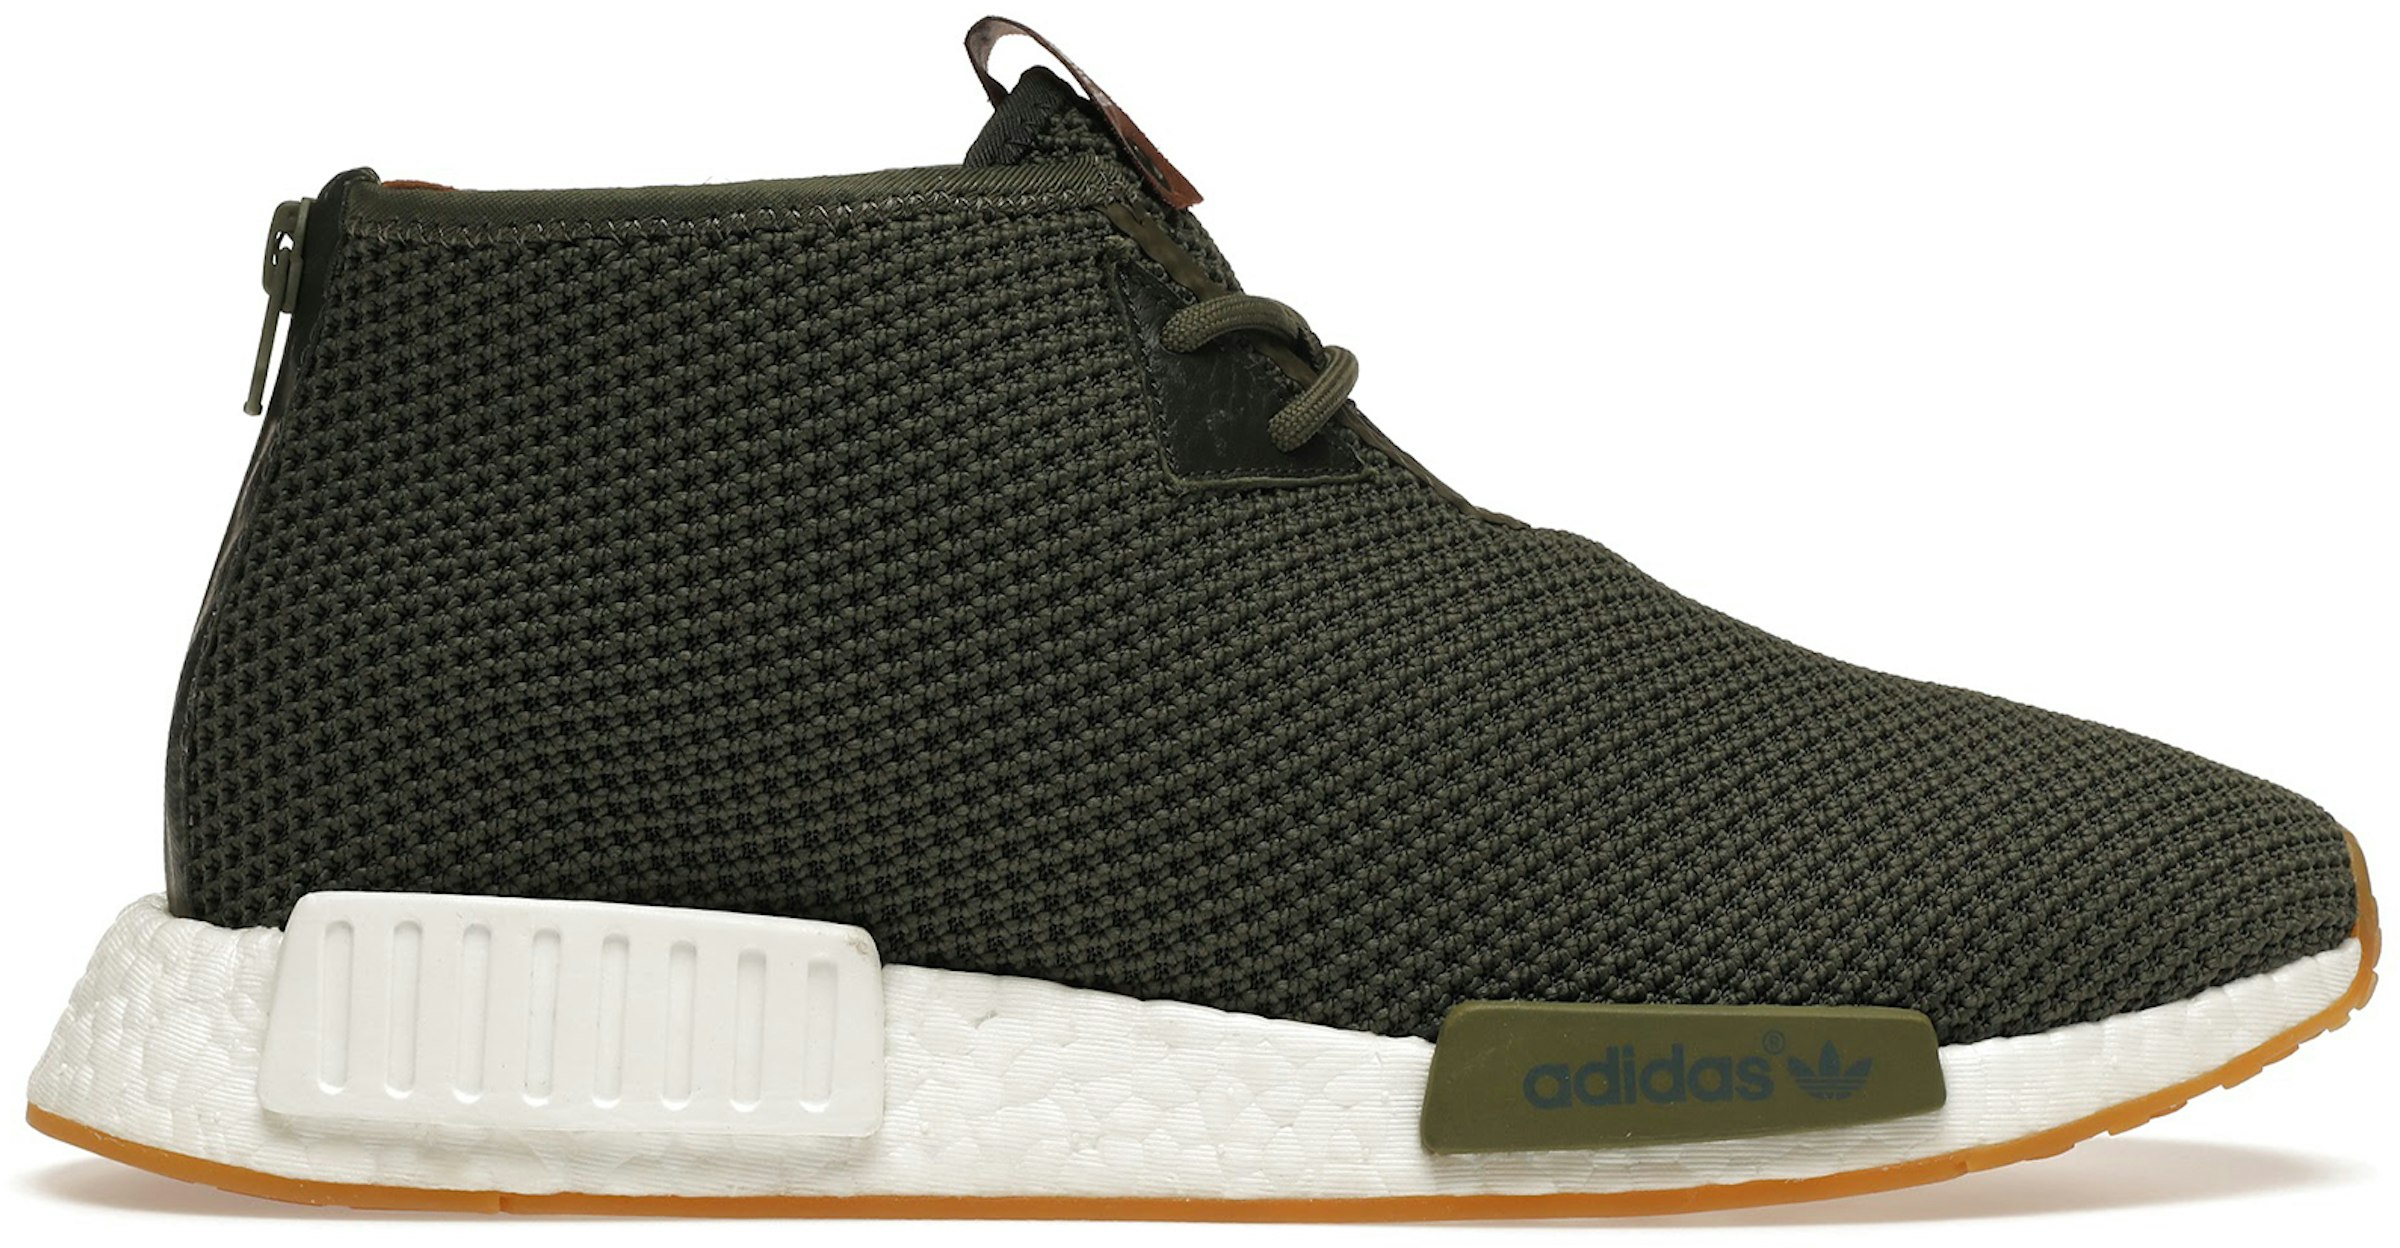 adidas NMD C1 END Men's BB5993 US